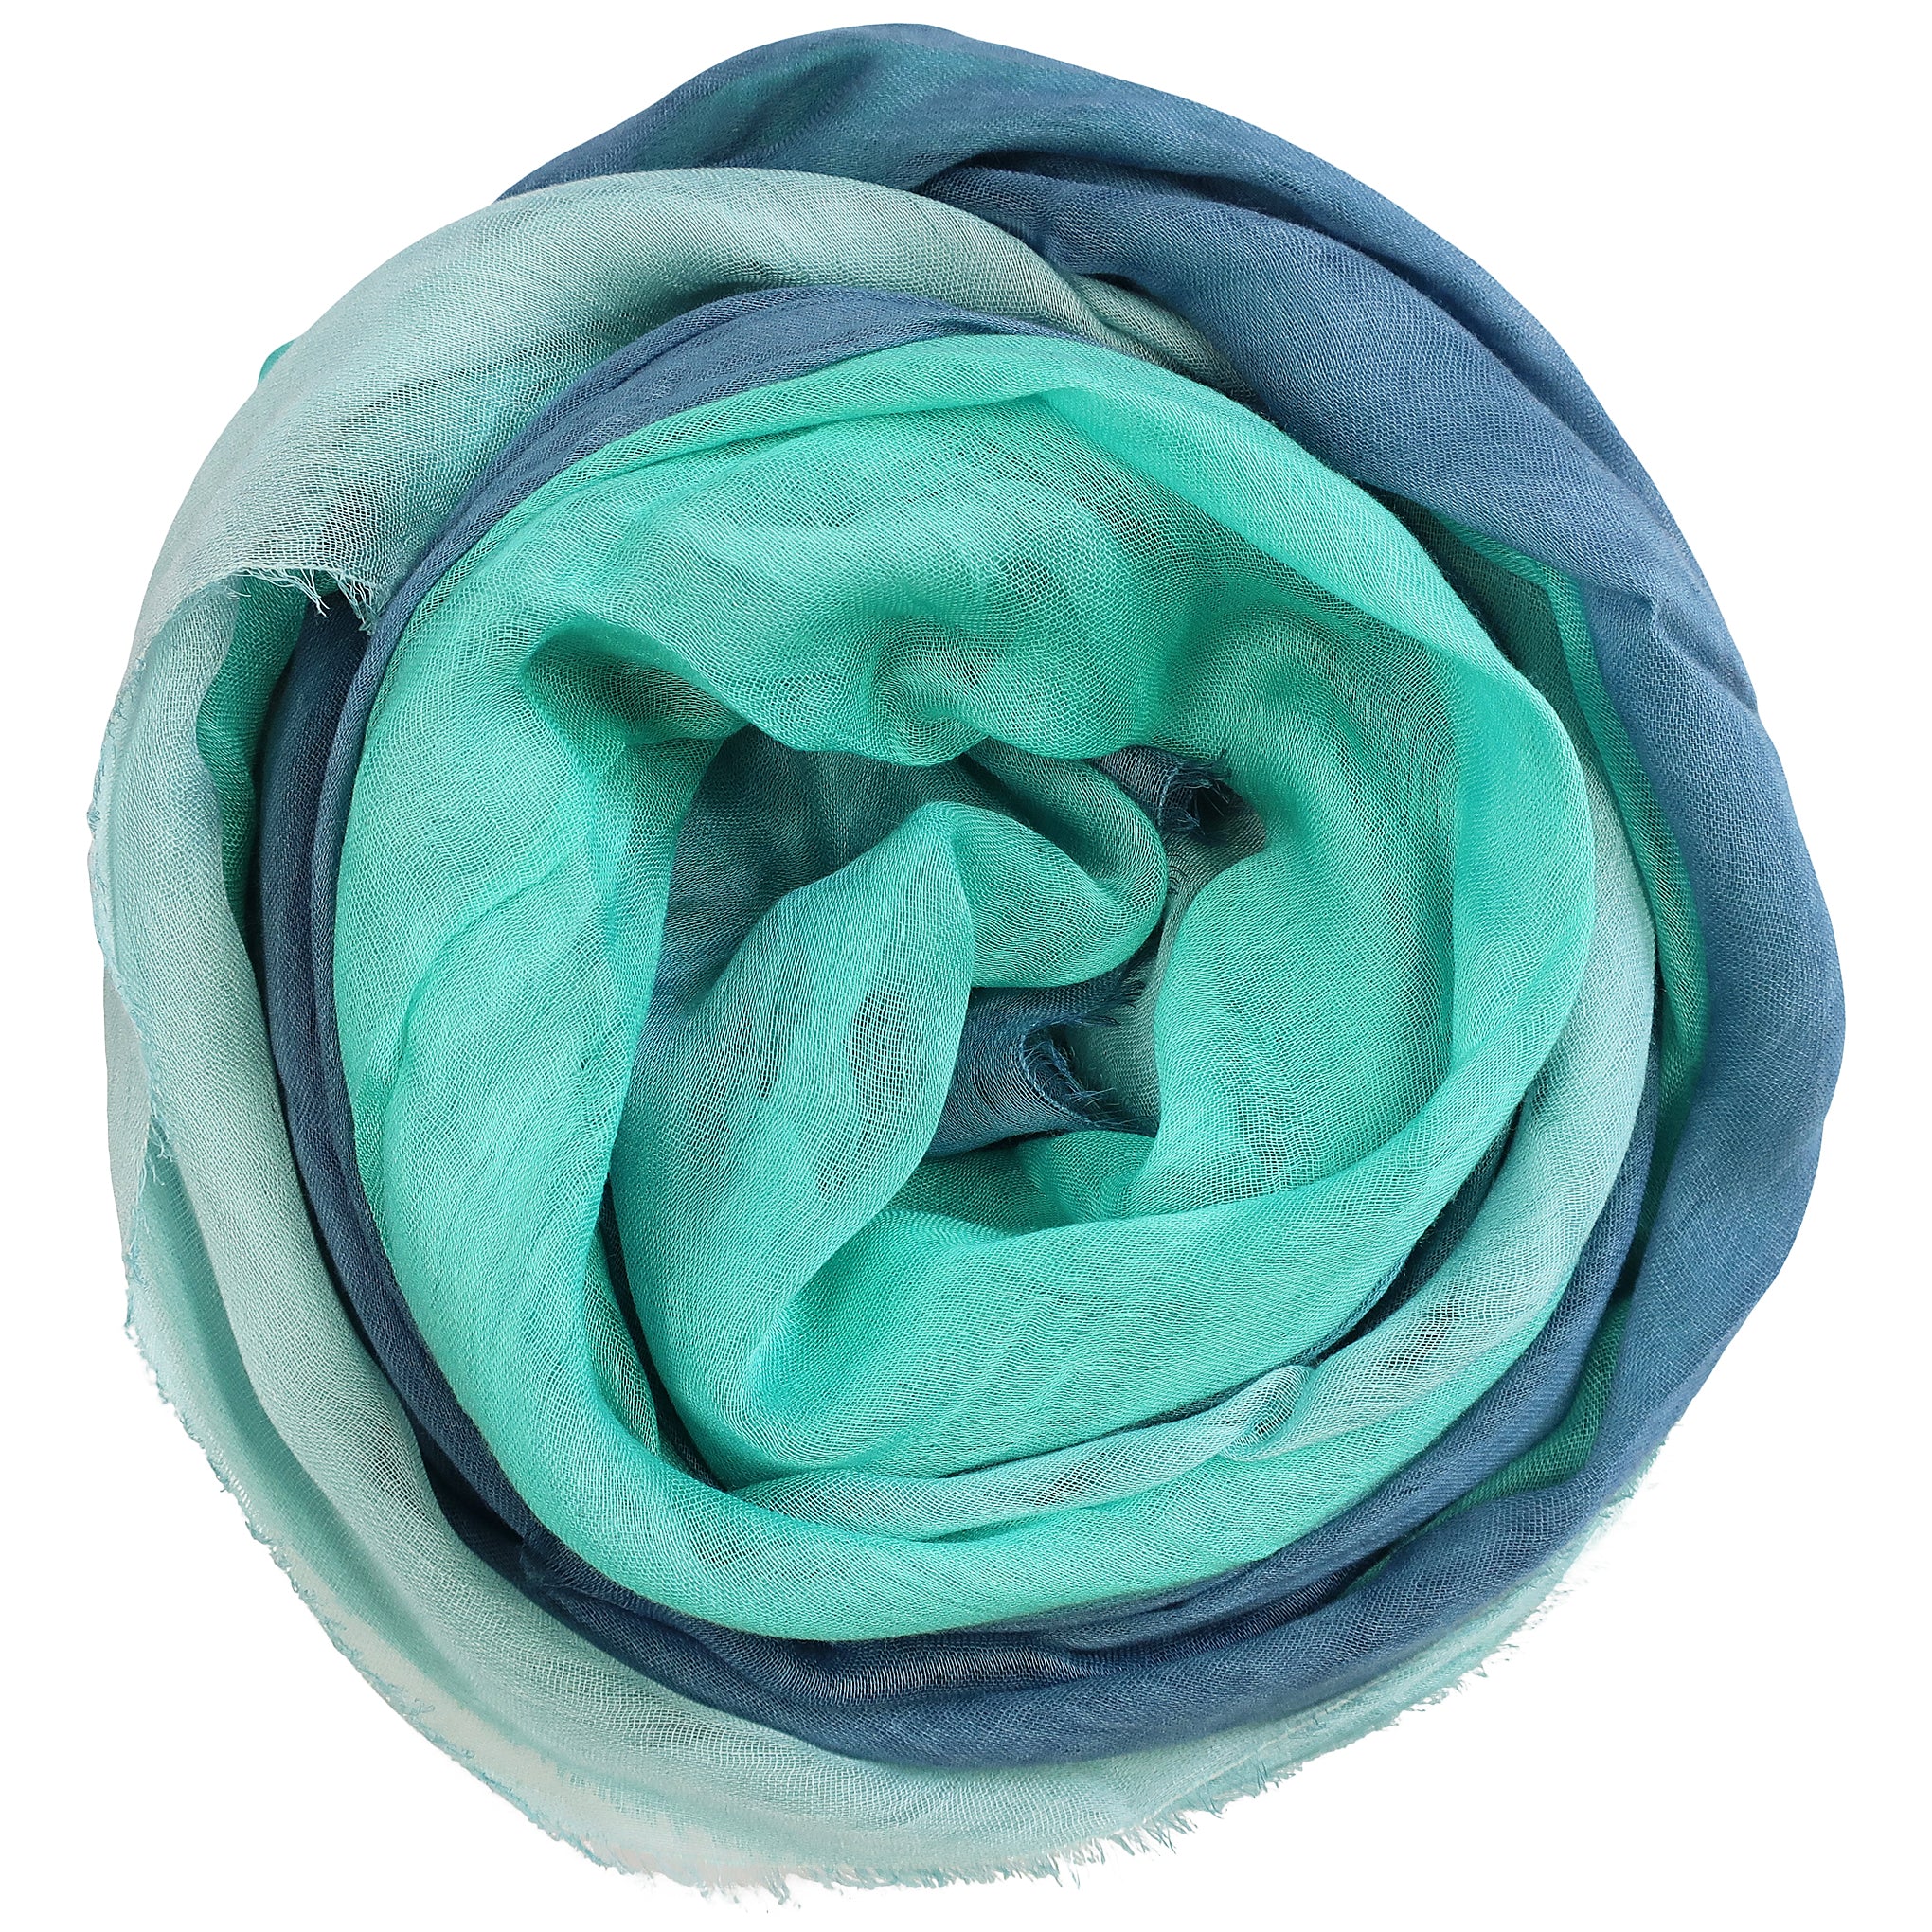 Blue Pacific Dream Cashmere and Silk Scarf in Denim Blue Teal and Mint 47 x 37